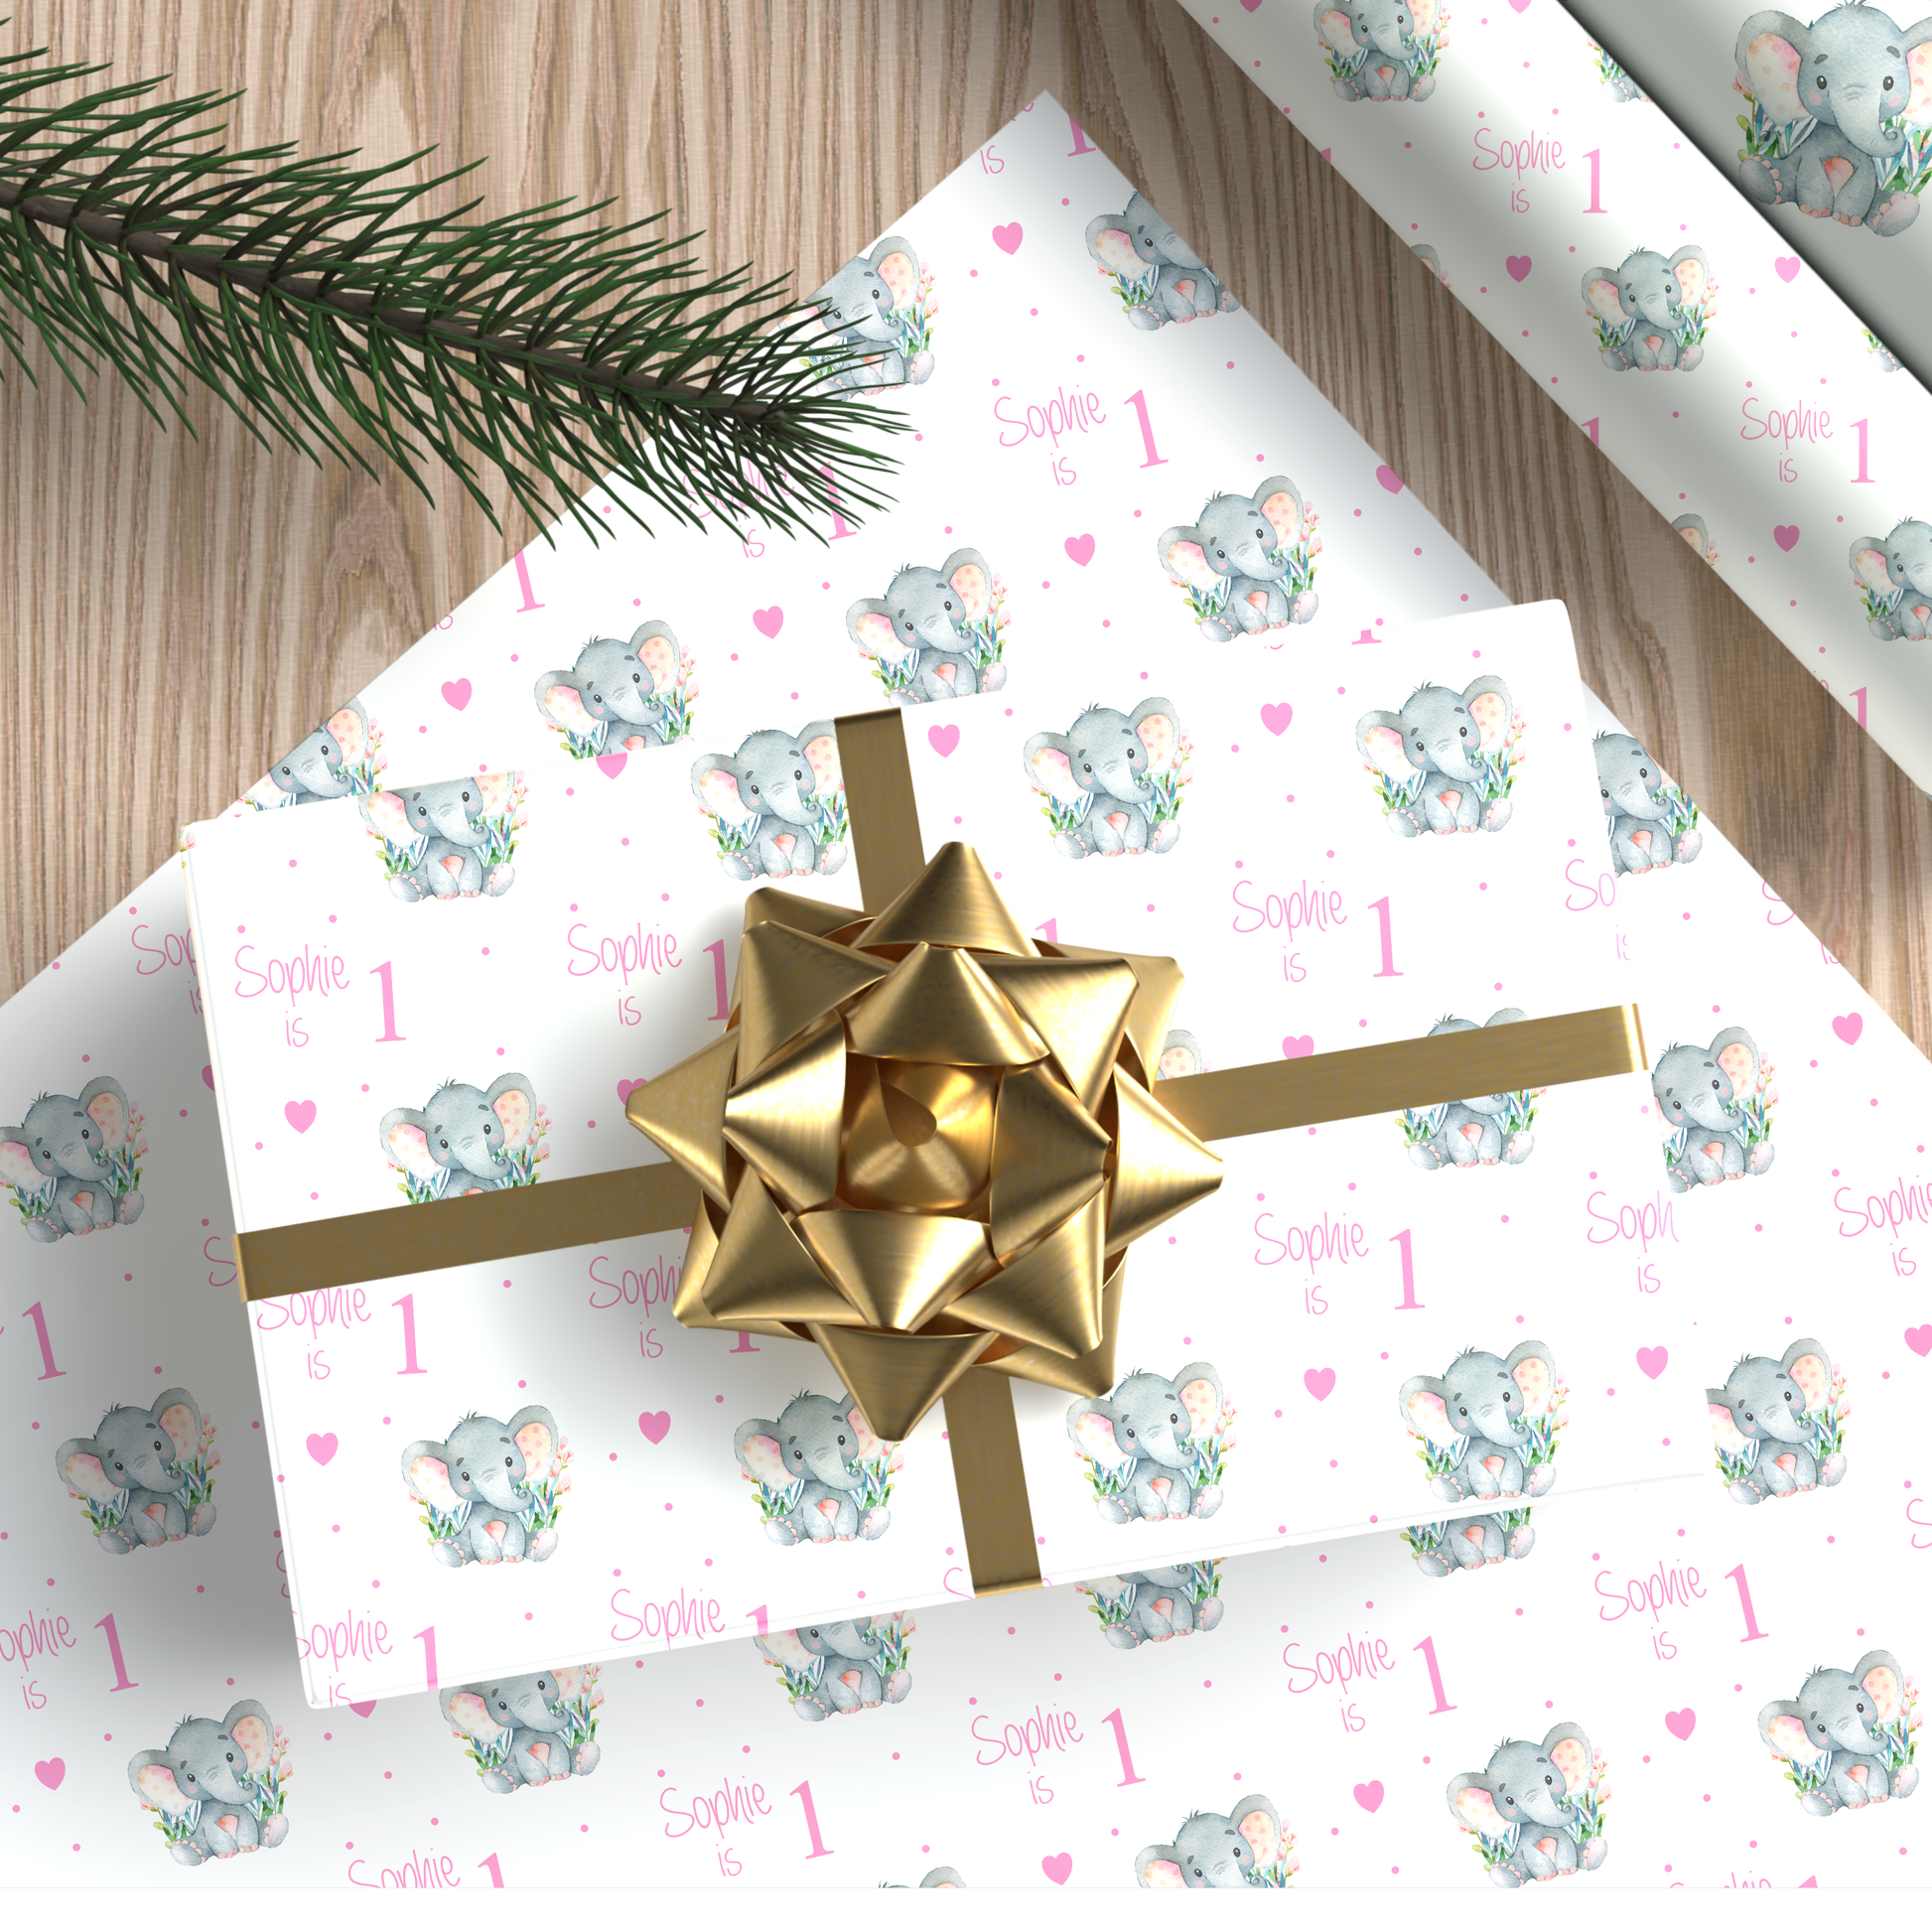 a present wrapped in gold paper with a bow